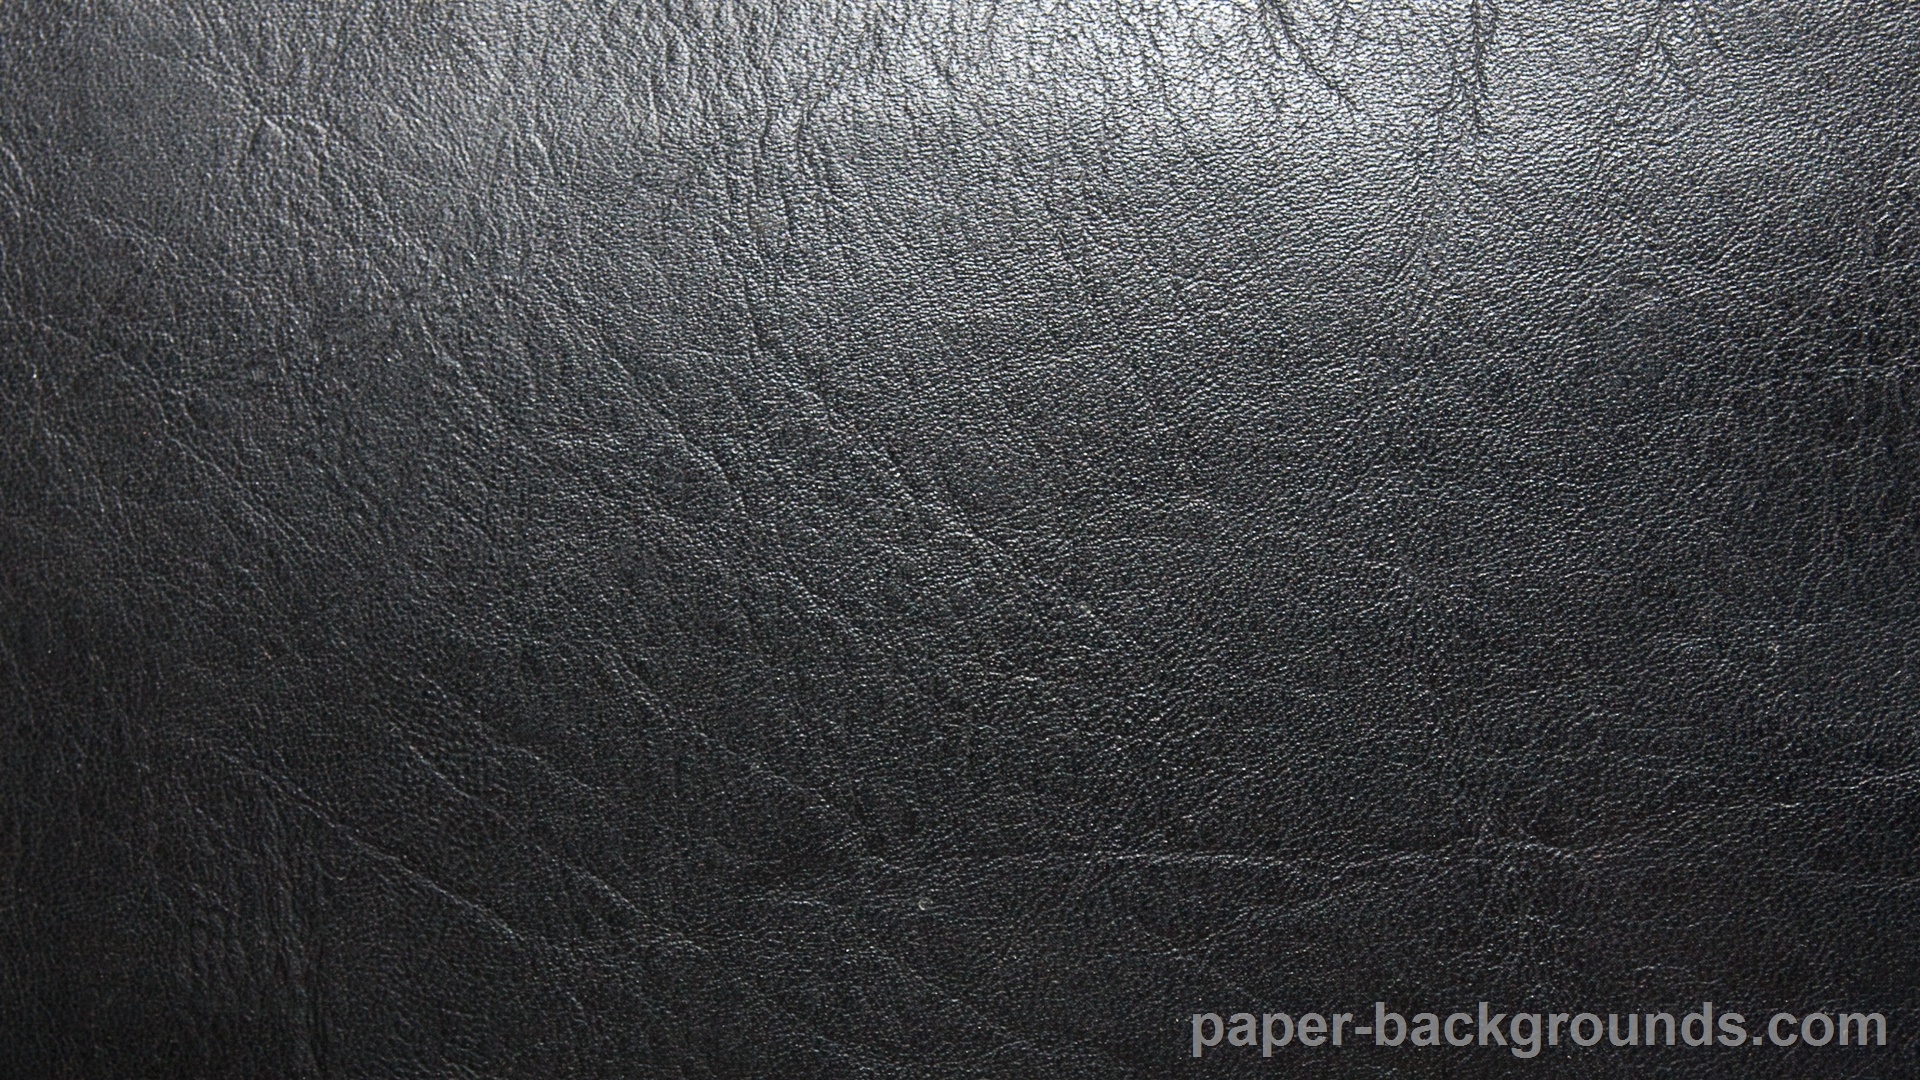 Leather Material Texture Background HD Paper Background